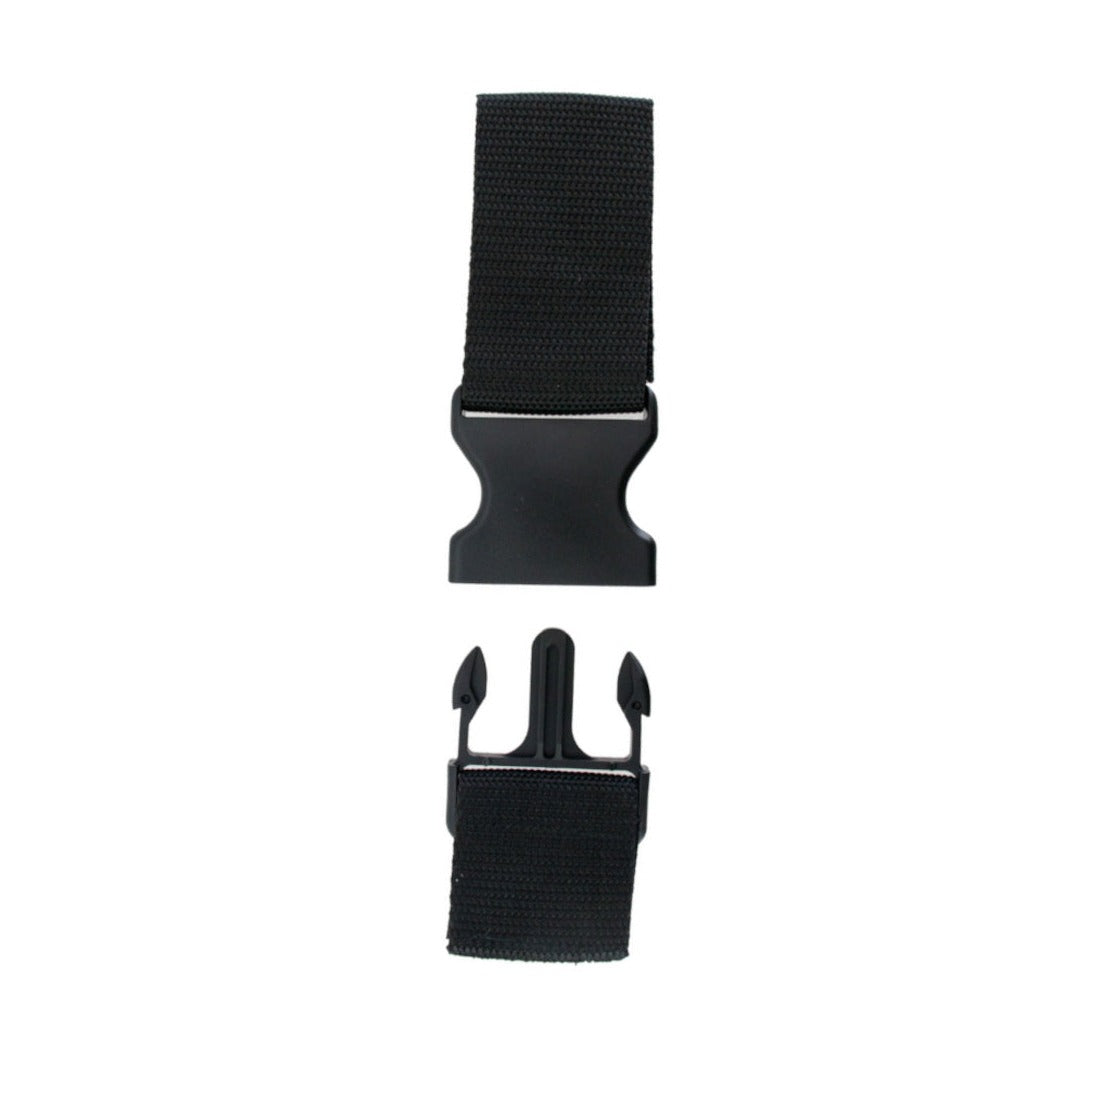 Aztec Samurai BOAB Replacement Strap Detached Tilted Right Front View